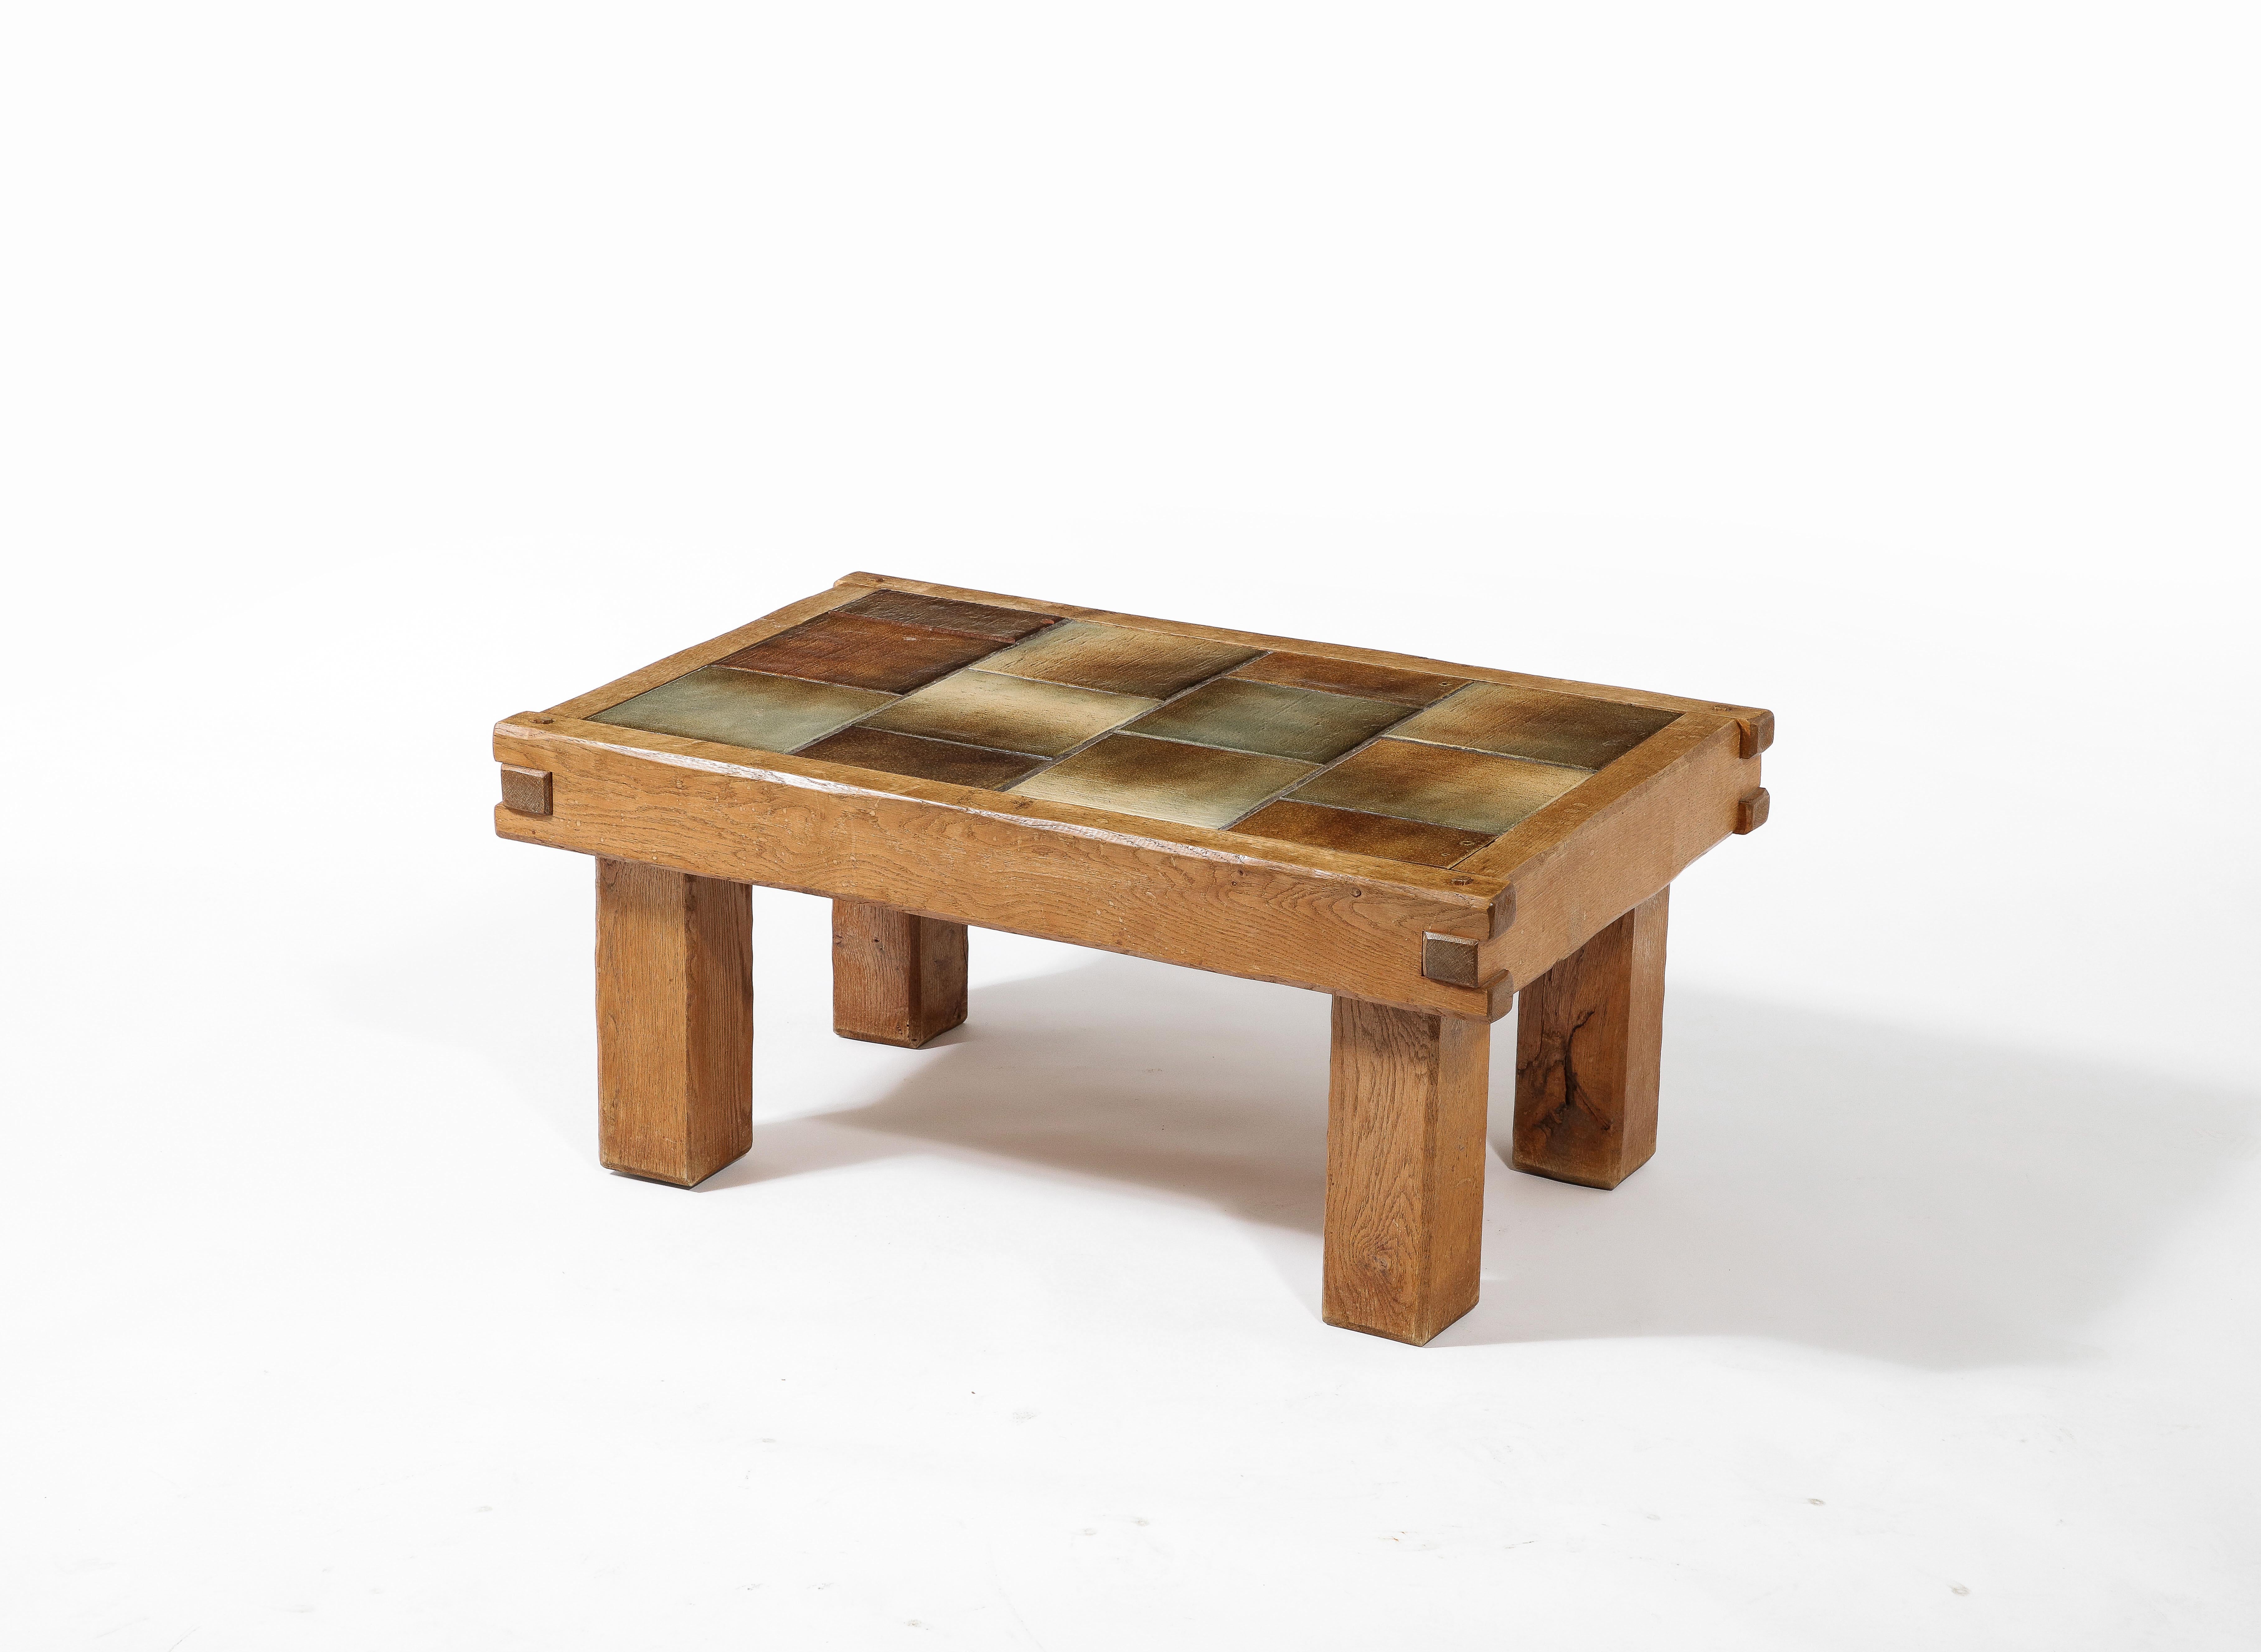 Small Brutalist Coffee Table with Ceramic Tile Top & Oak, France 1960's For Sale 7